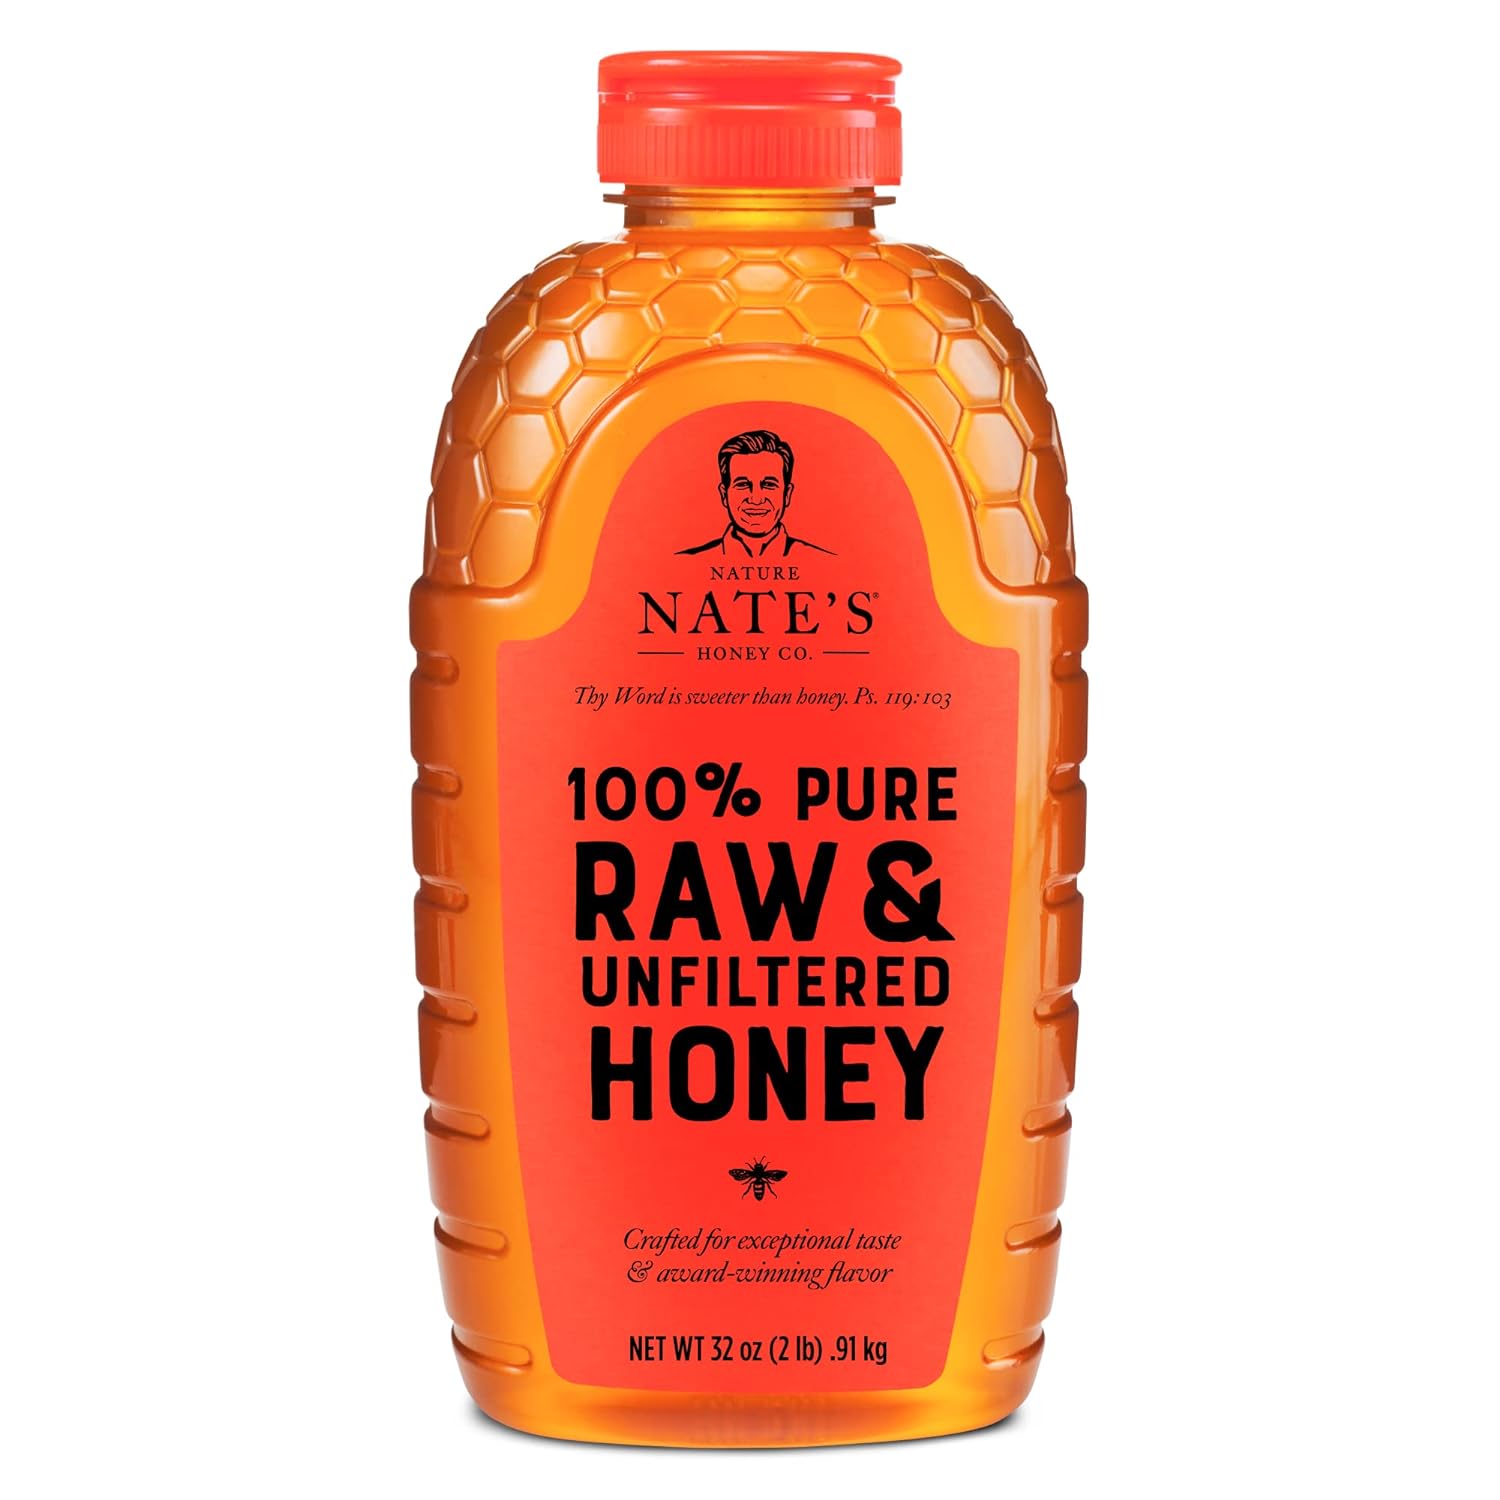 Nate’s 100% Pure, Raw & Unfiltered Honey